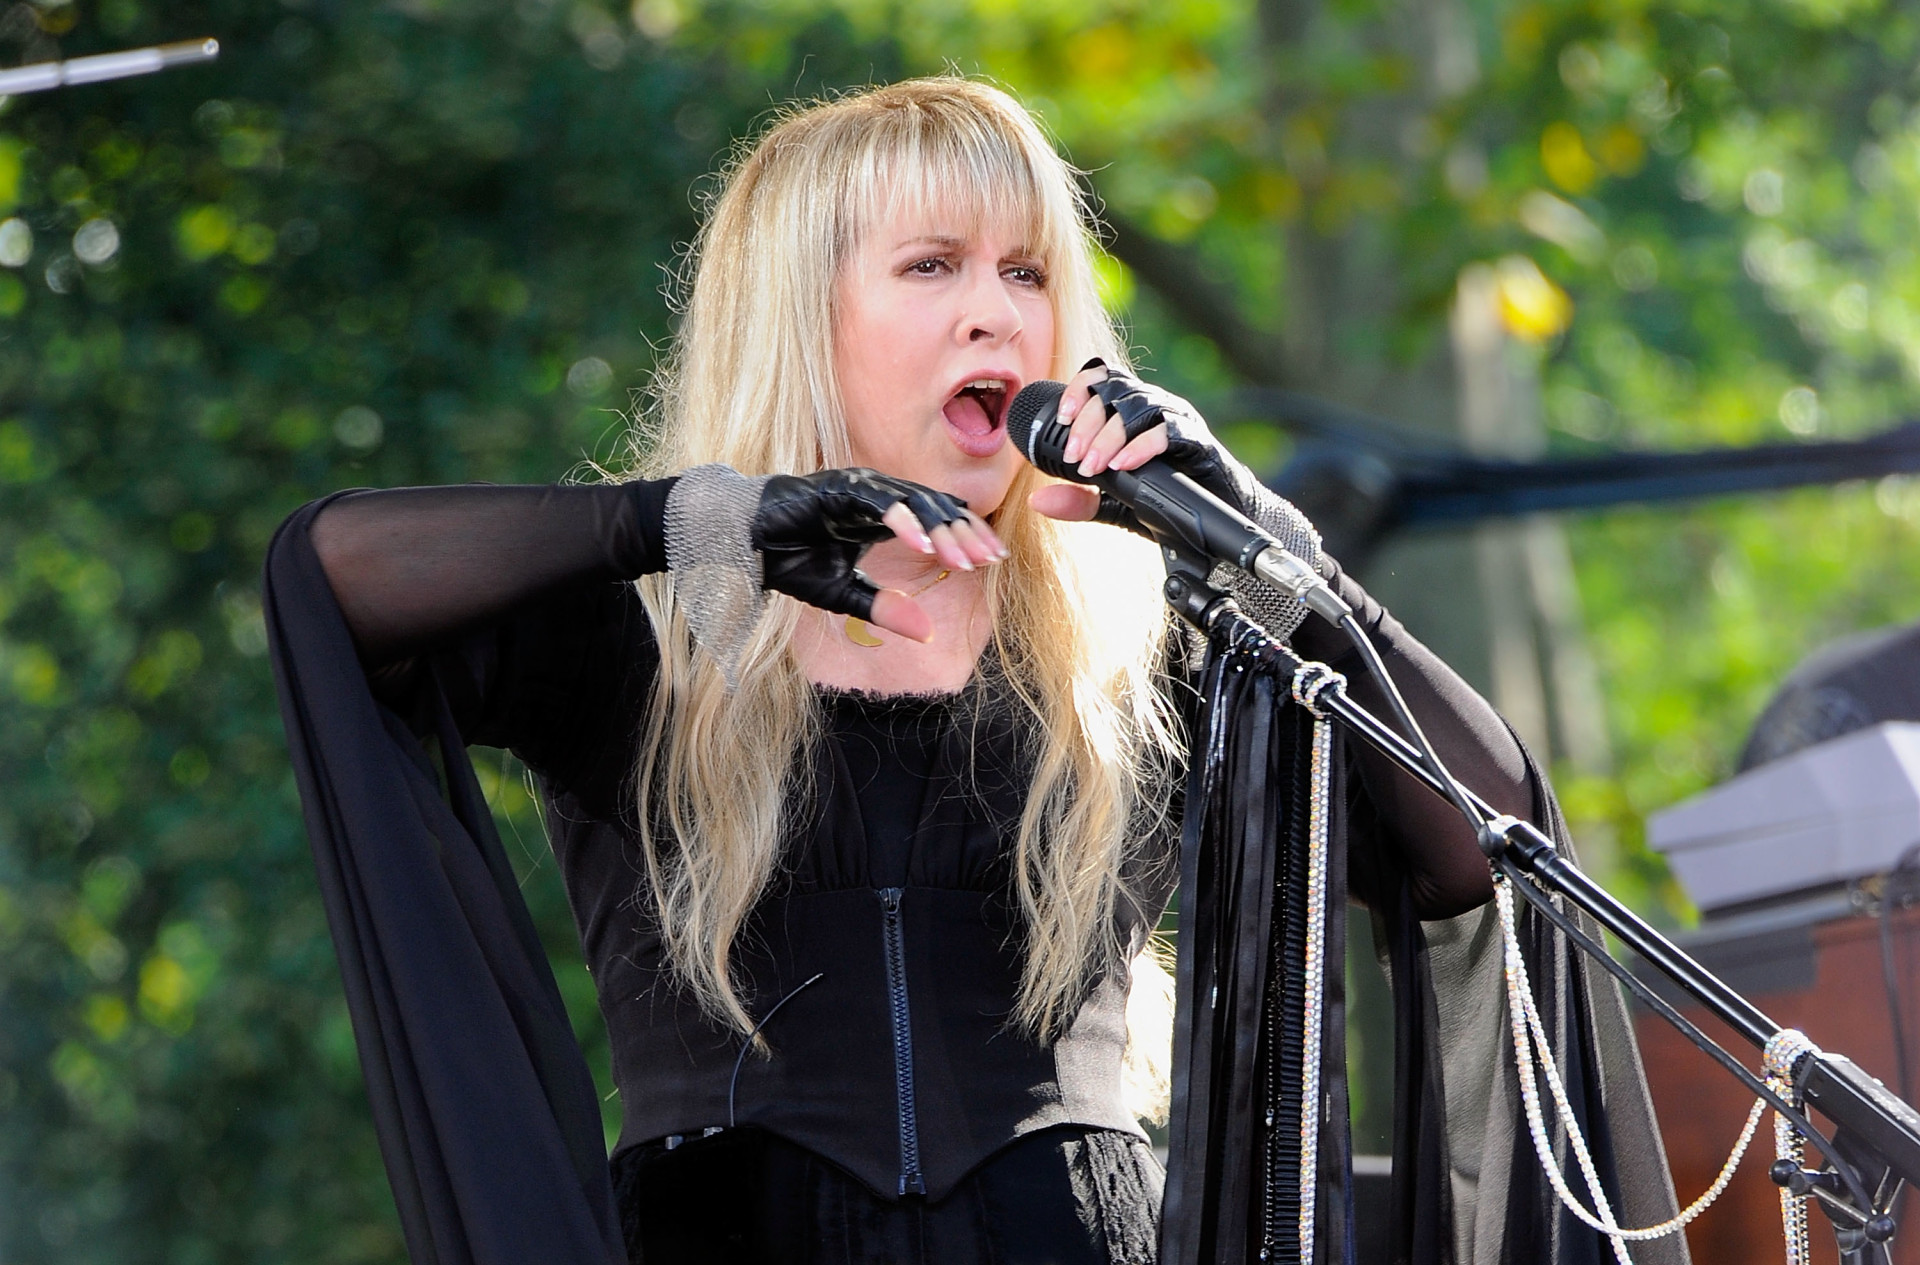 <p>The Fleetwood Mac singer's witchy style has often been imitated, but rarely pulled off so well.</p><p>You may also like:<a href="https://www.starsinsider.com/n/383013?utm_source=msn.com&utm_medium=display&utm_campaign=referral_description&utm_content=624139en-ae"> The 30 all-time highest-grossing films in the world</a></p>